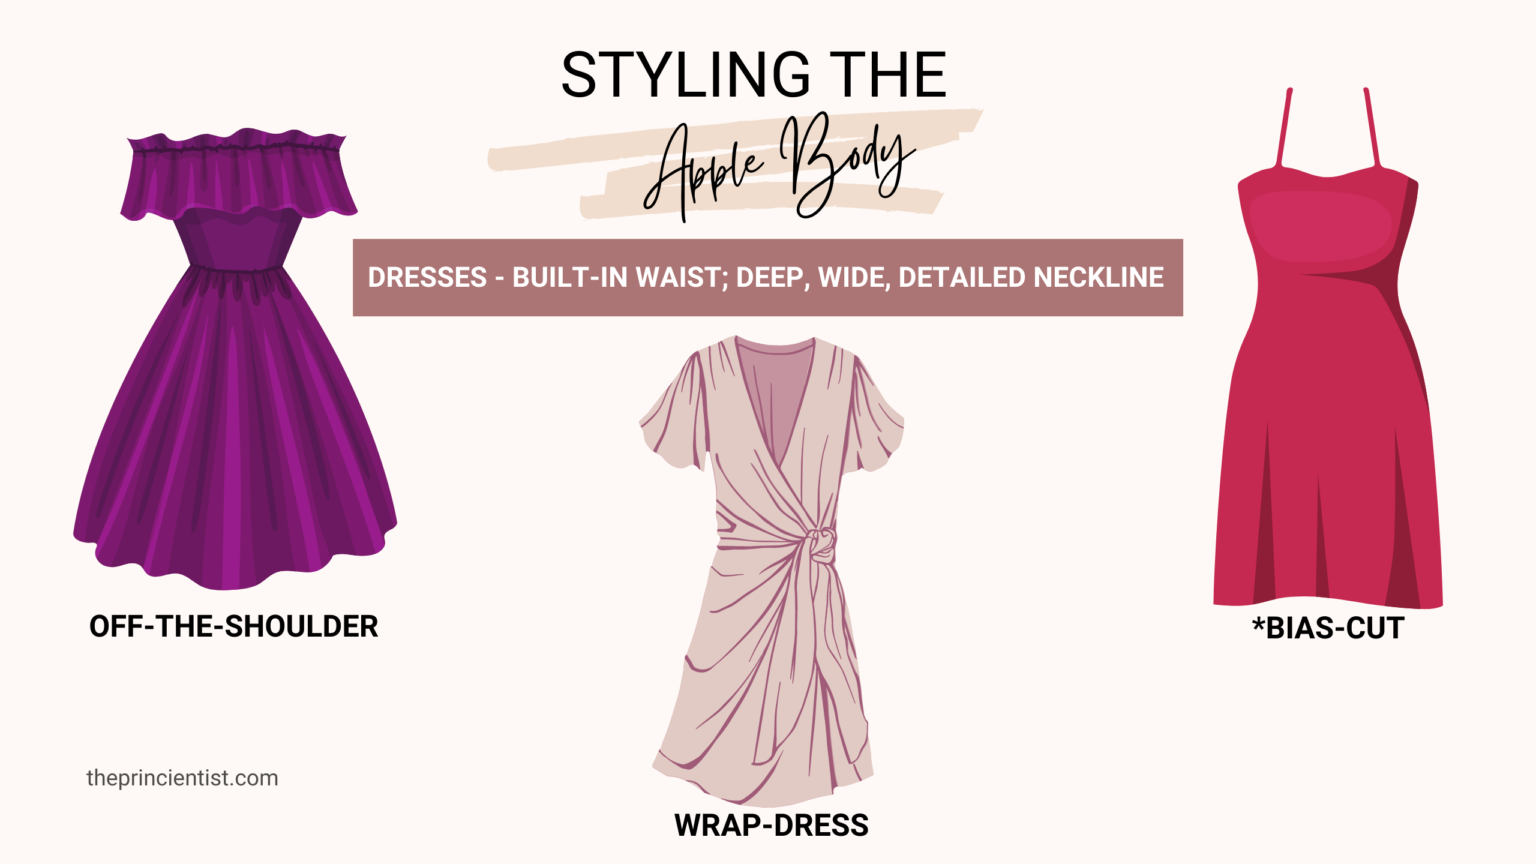 how to dress the apple shaped body - dresses: built-in waist, deep, wide and detailed neckline